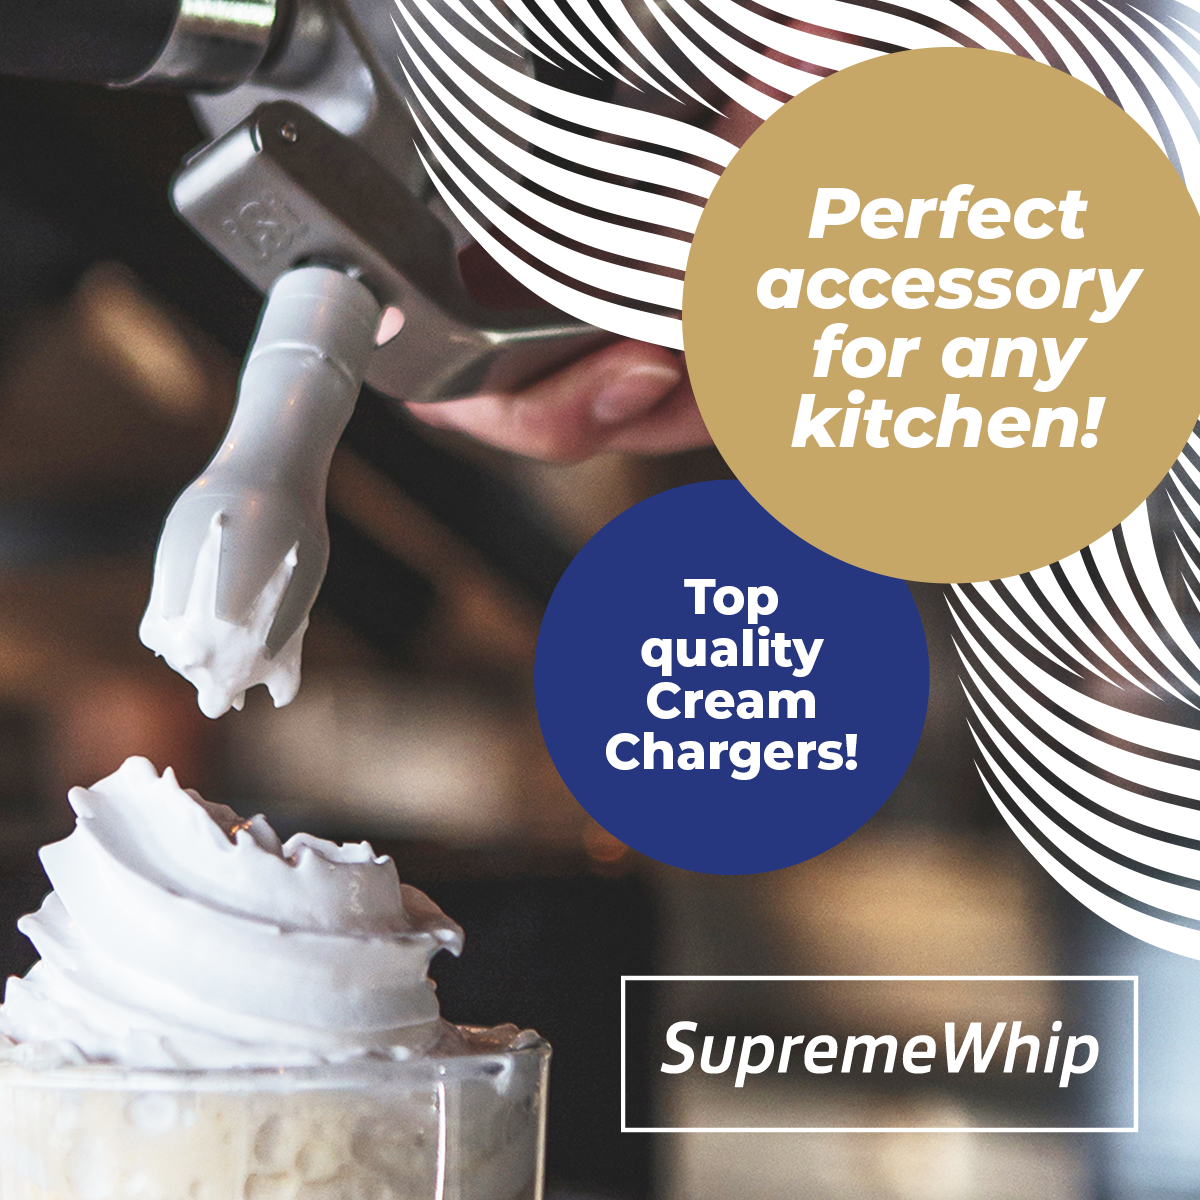 Supremewhip cream chargers starter pack wholesale